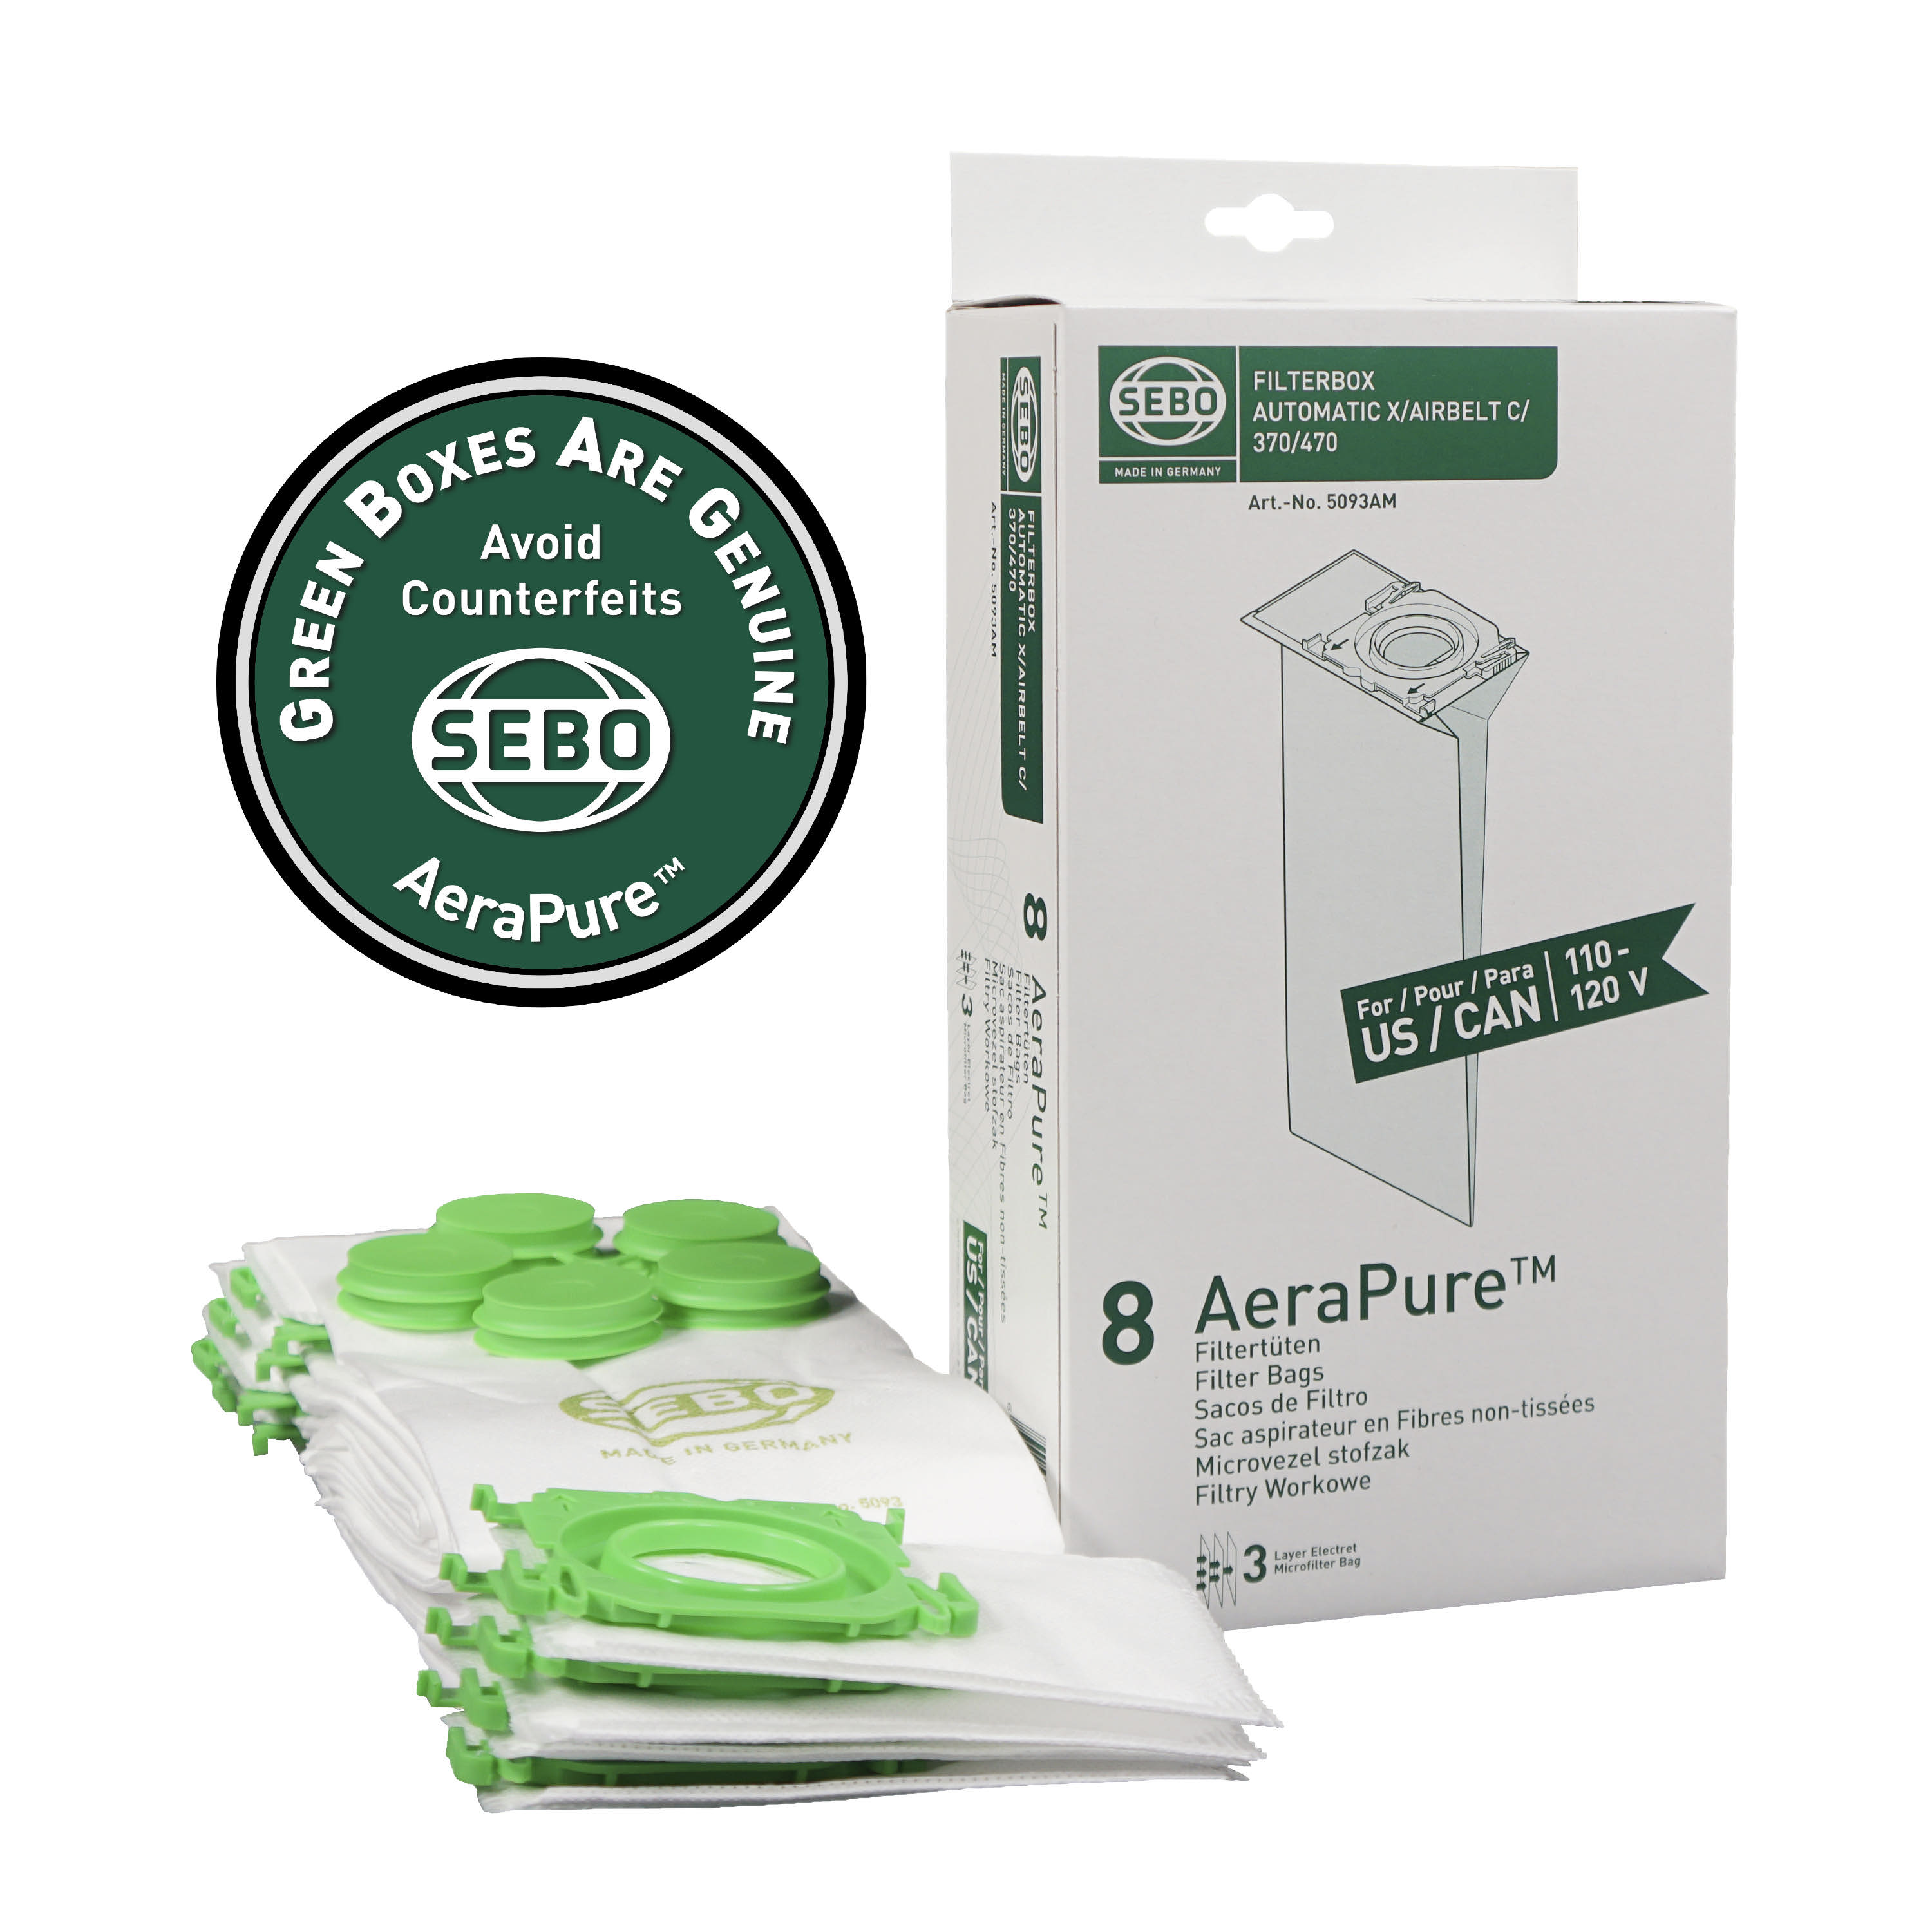 Filter Bag Box - X, G, C, 300, 350, and 370 (1 piece), 8 three-layer AeraPure Bags with caps per box 